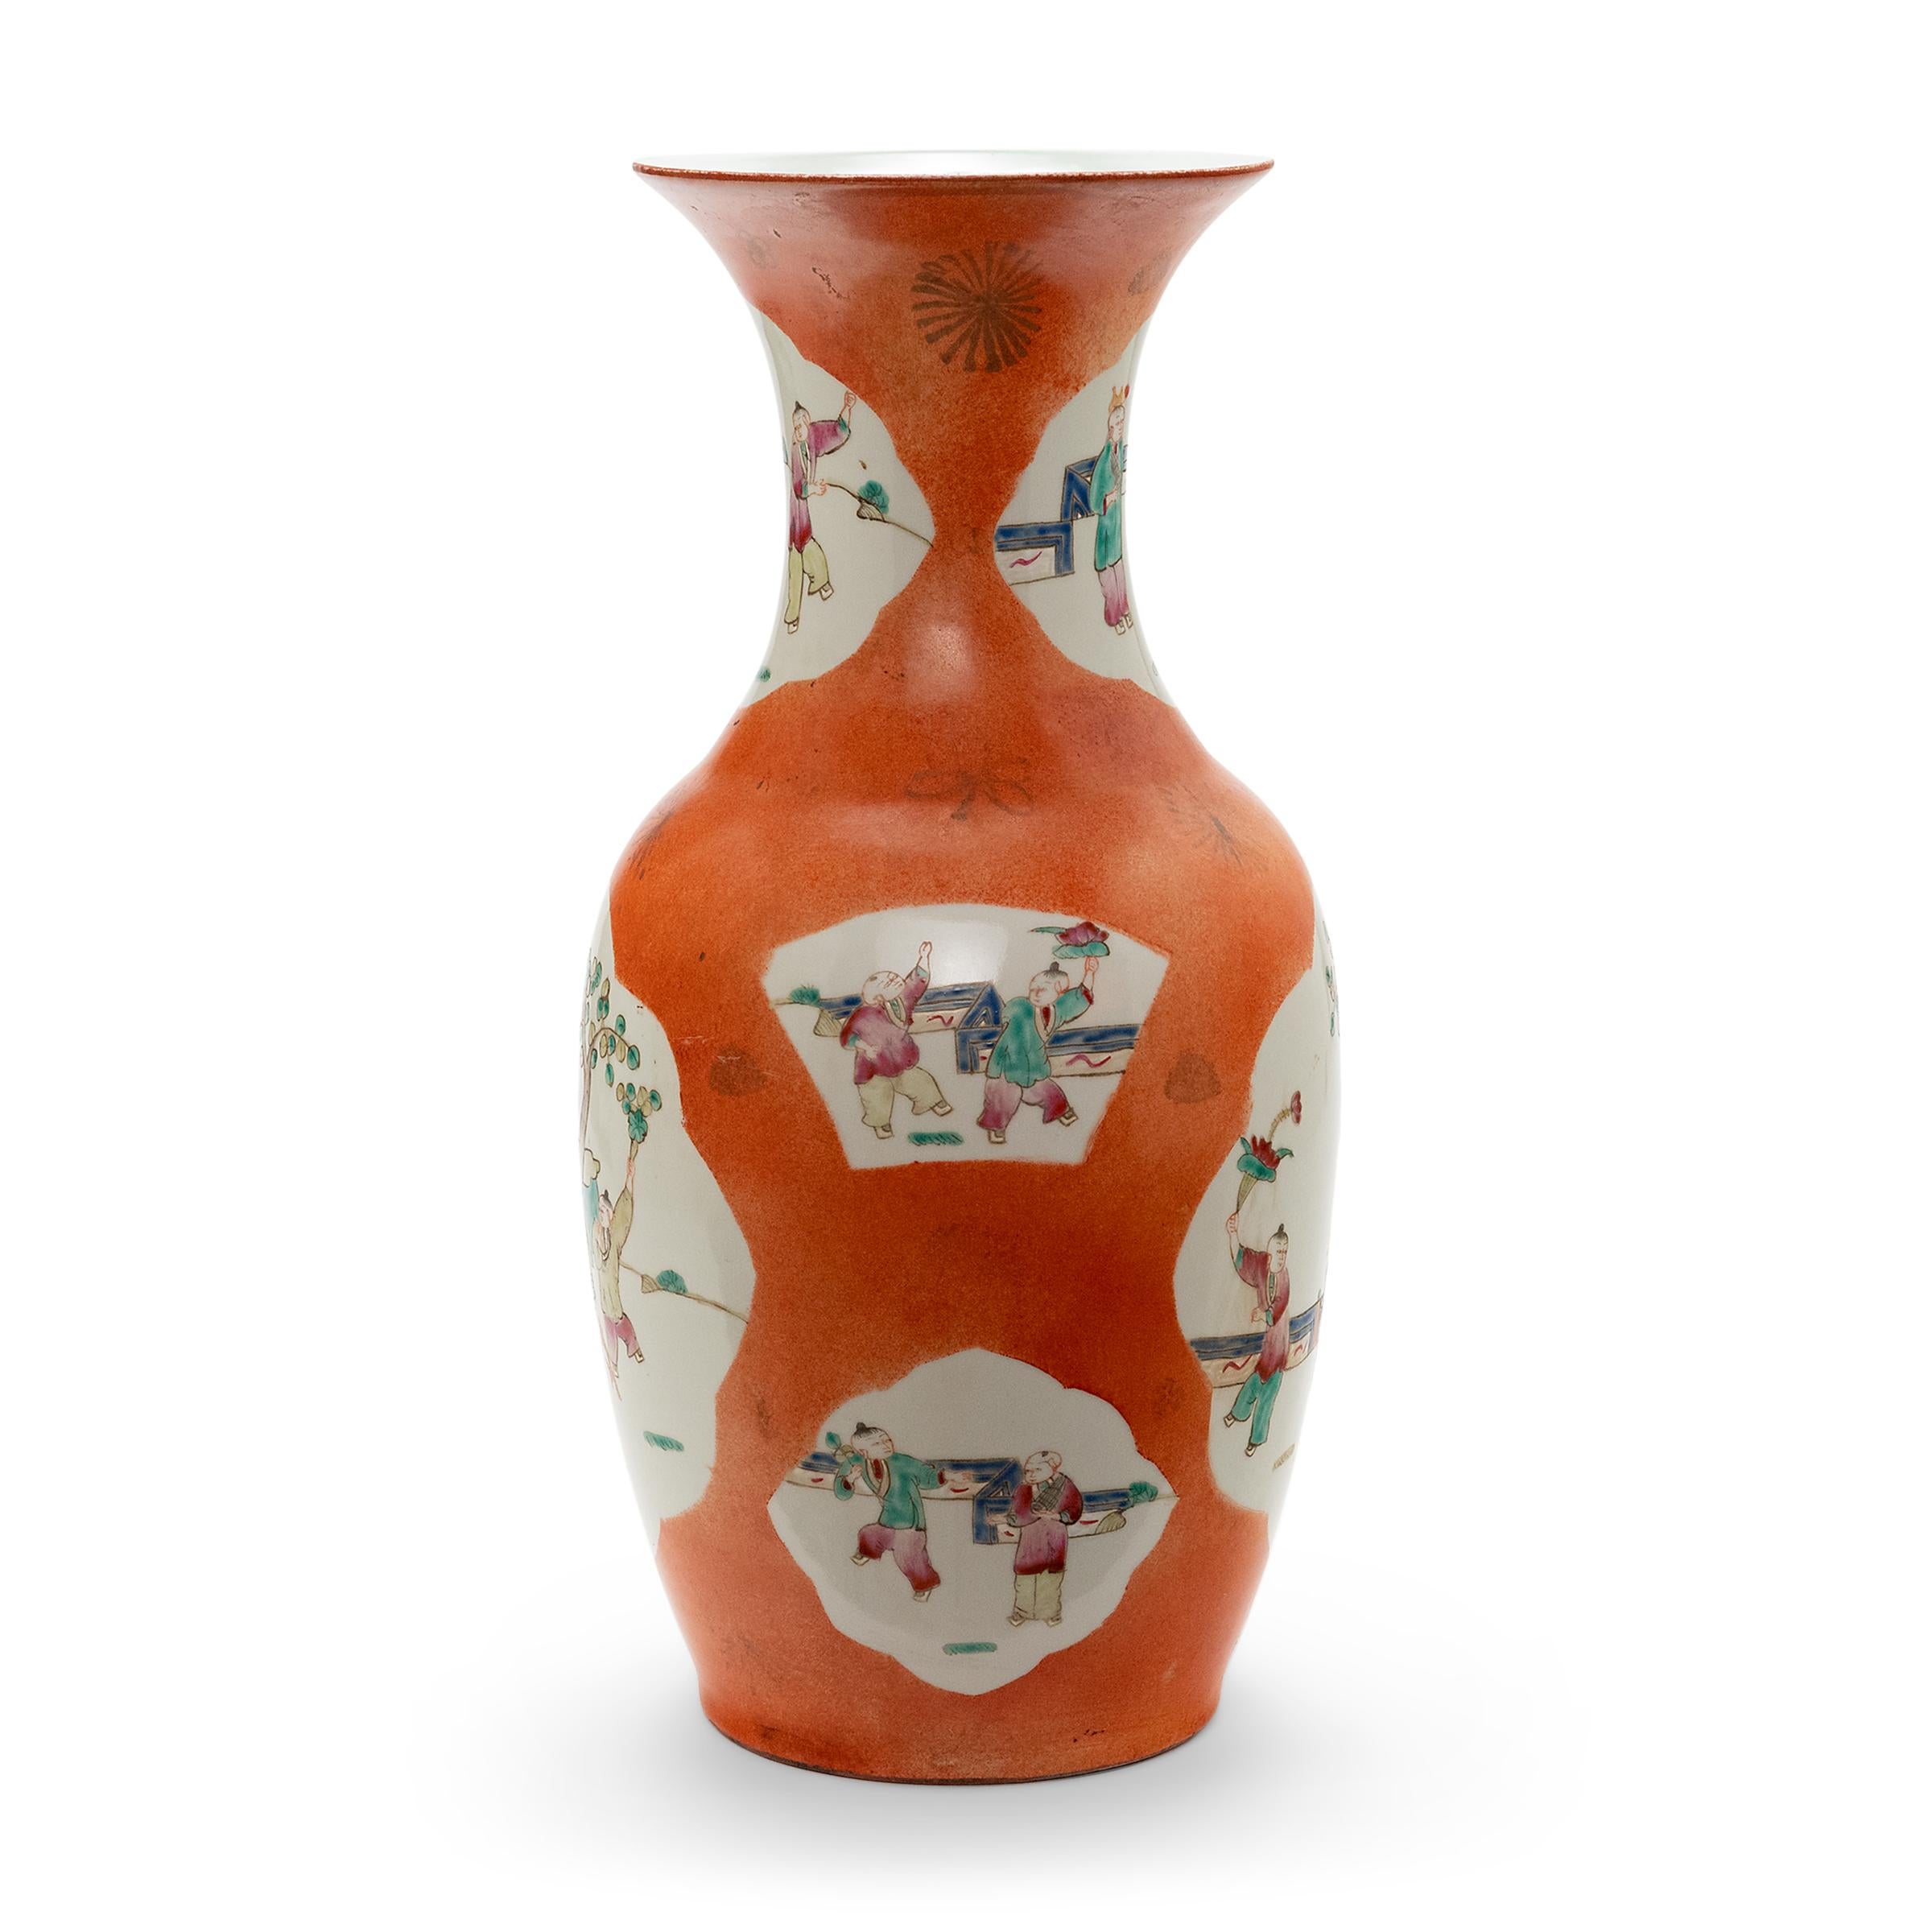 This phoenix tail vase is the perfect example of enduring Chinese symbolism and design. The body and flared neck of the vase bears a cartouche painting containing a picturesque scene. Each vignette displays a group of young boys in a traditional